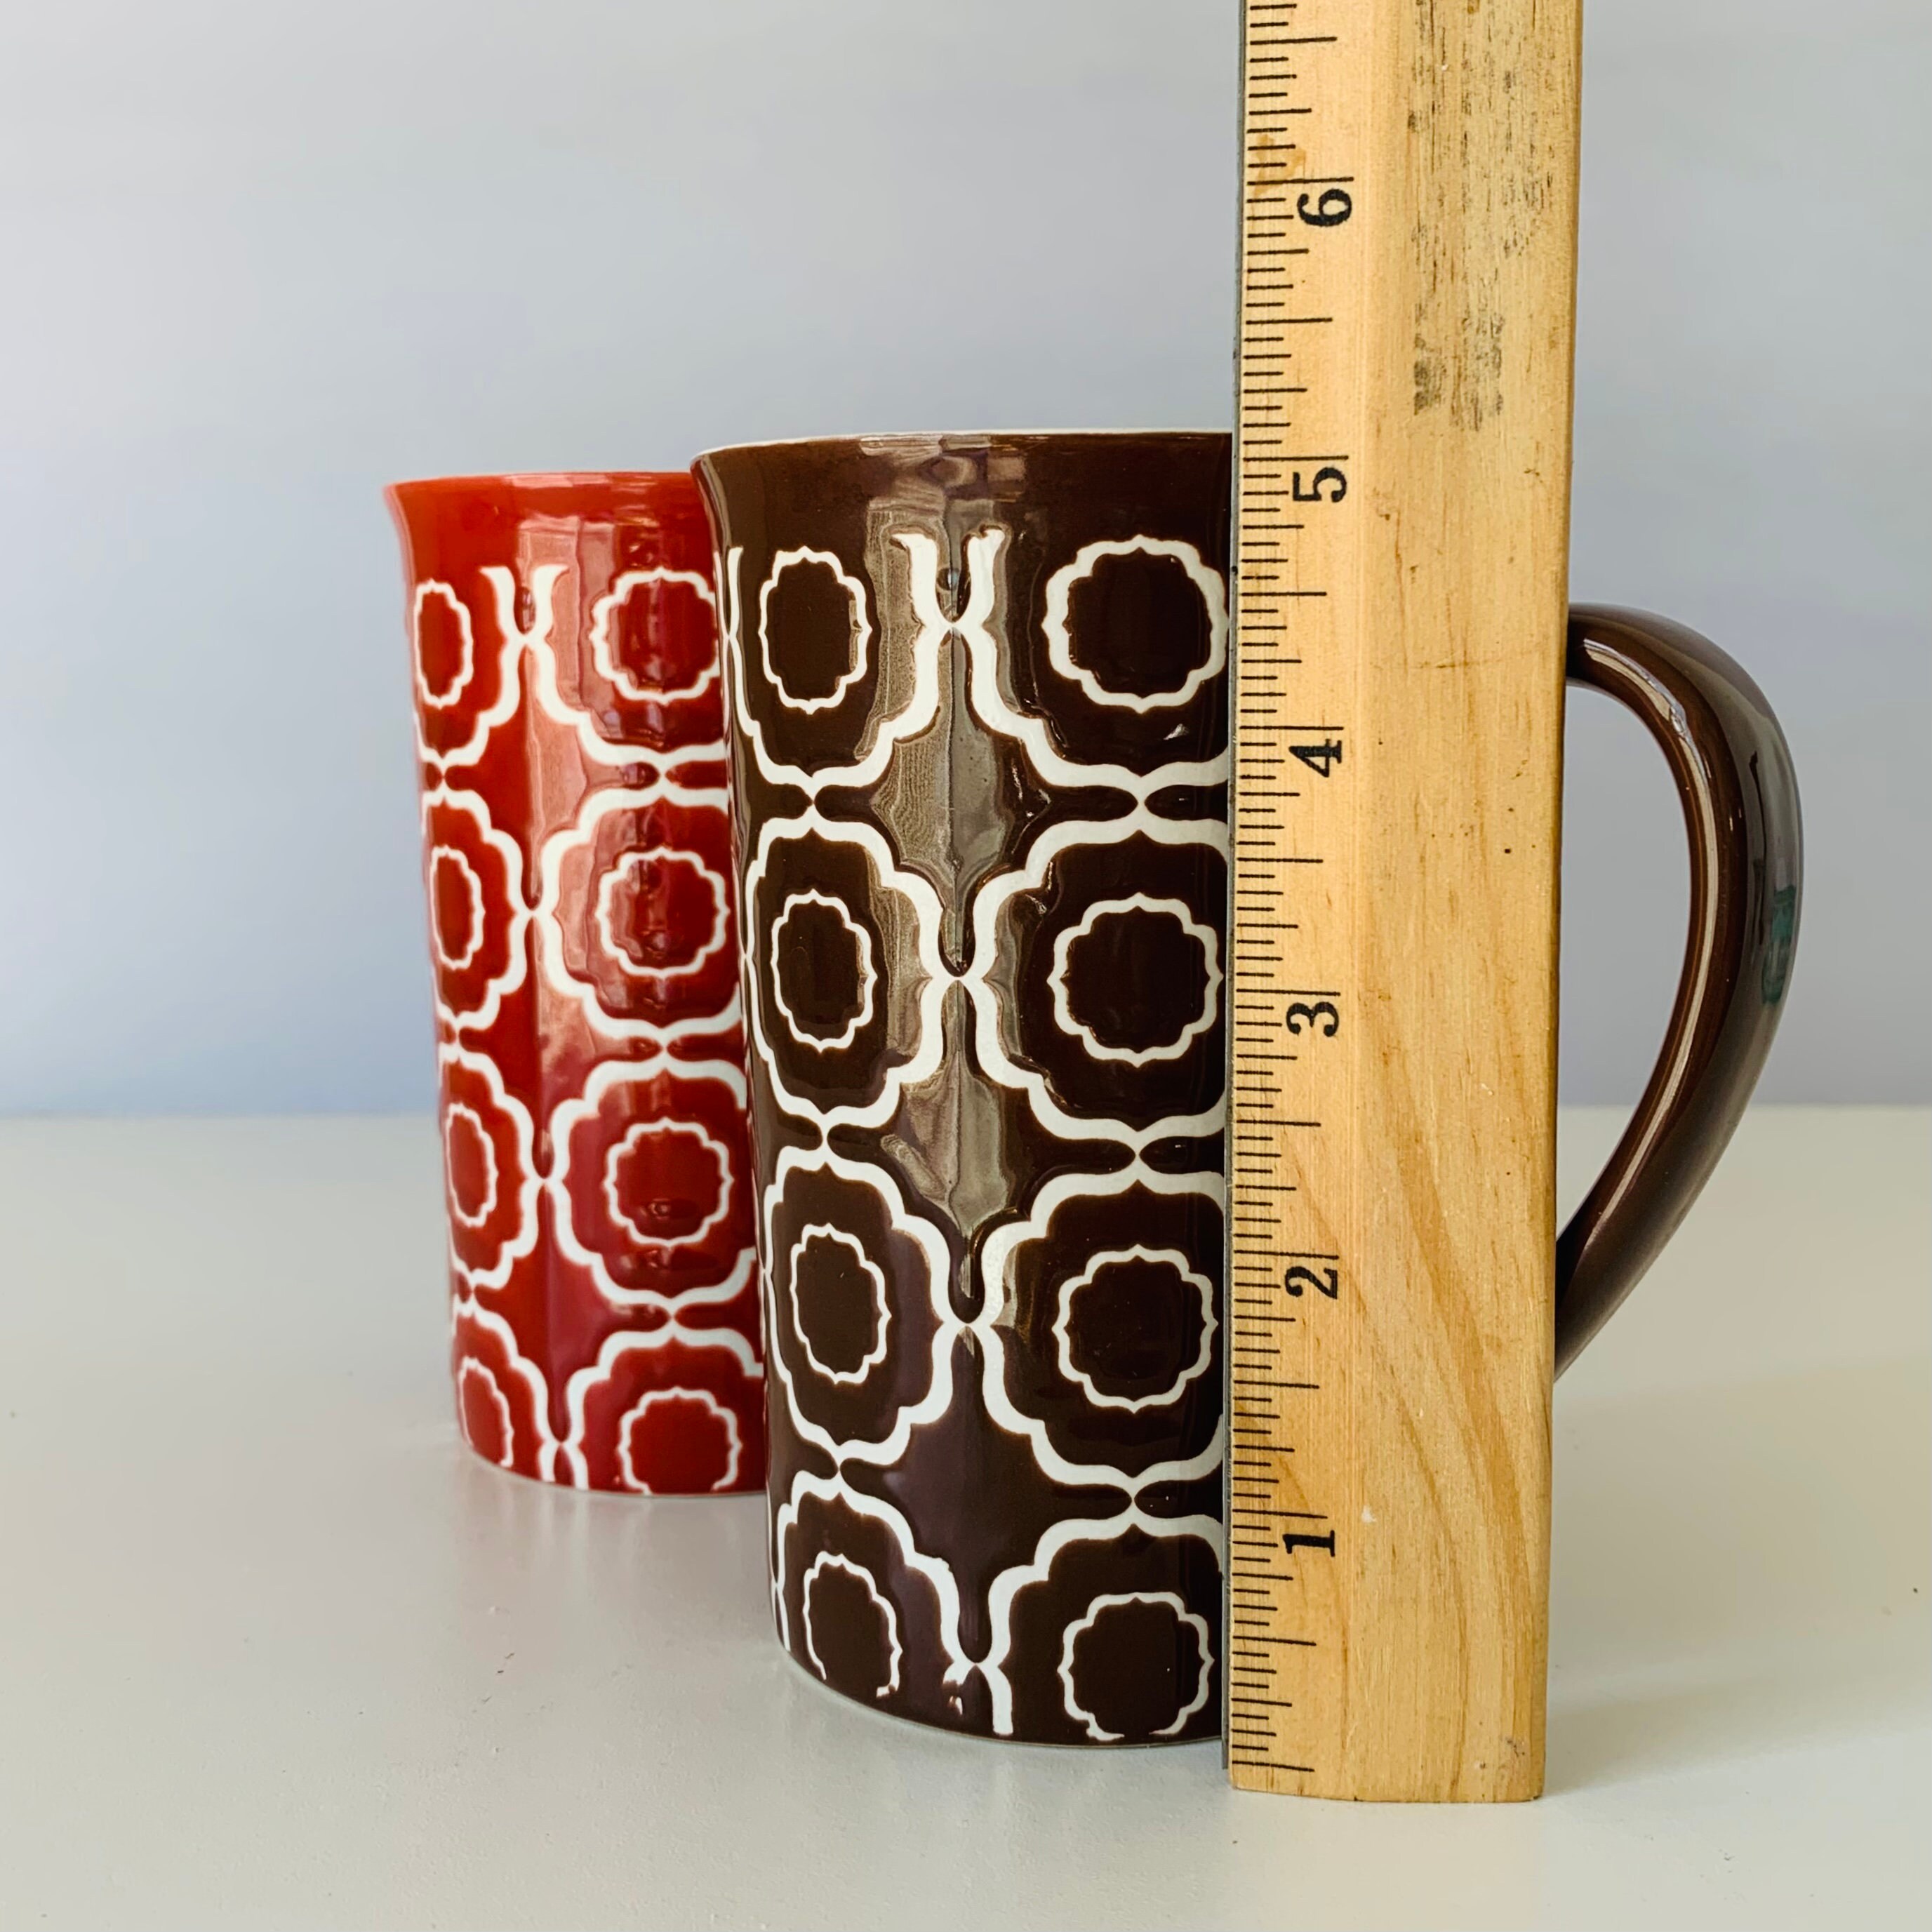 2 Tabletop Avenue Modern Tile Handcrafted 5 Tall Coffee Cup Mugs  Tan/Orange Red